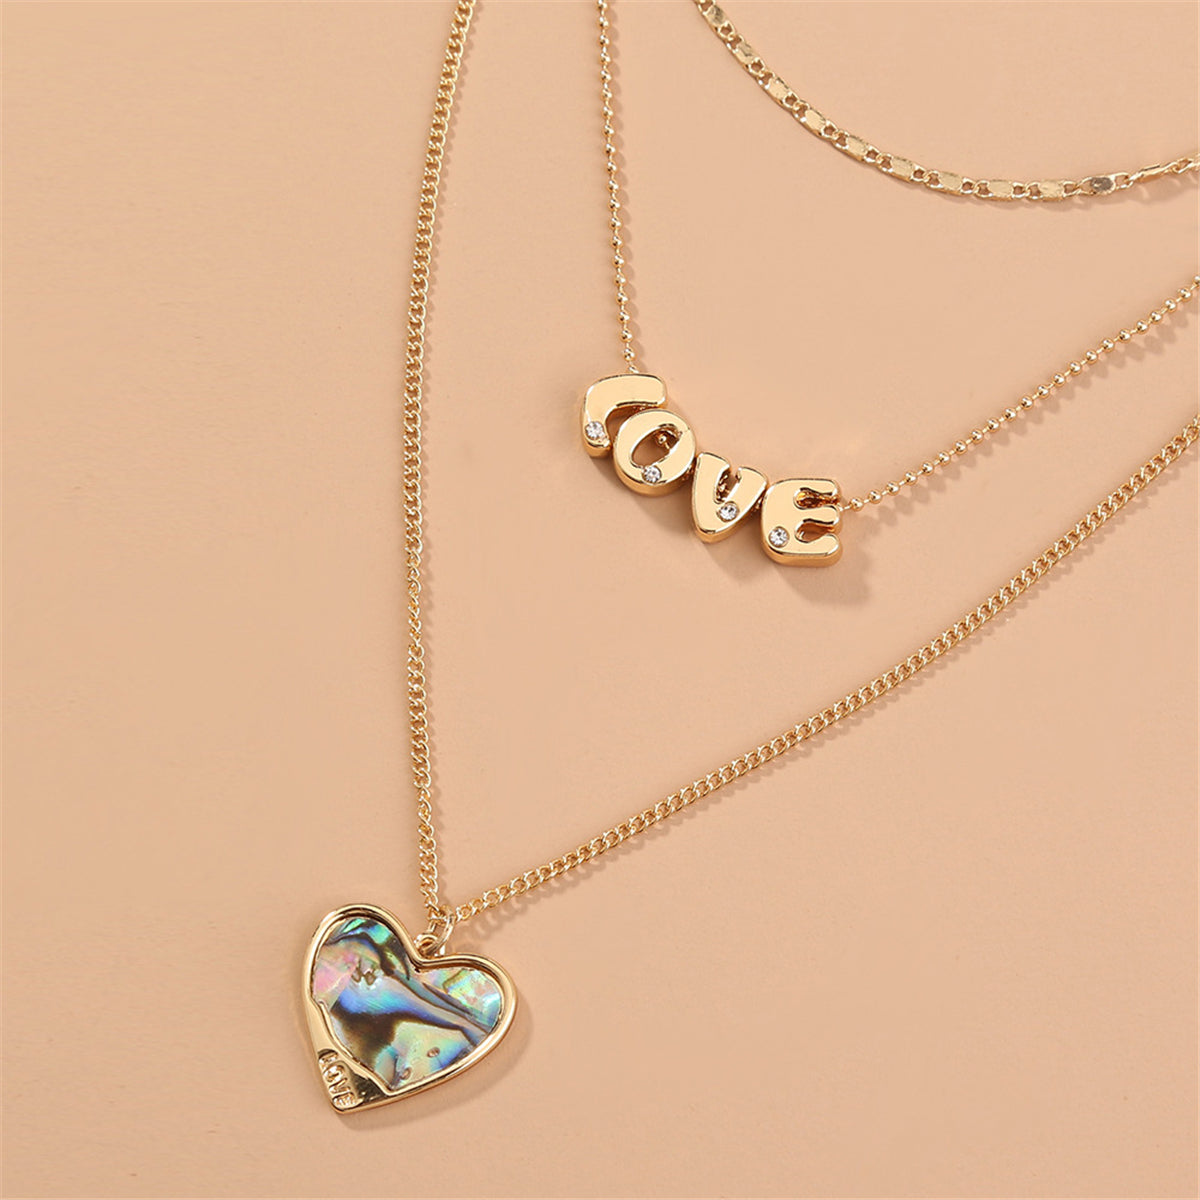 Abalone & Cubic Zirconia 'Love' Heart Layered Pendant Necklace